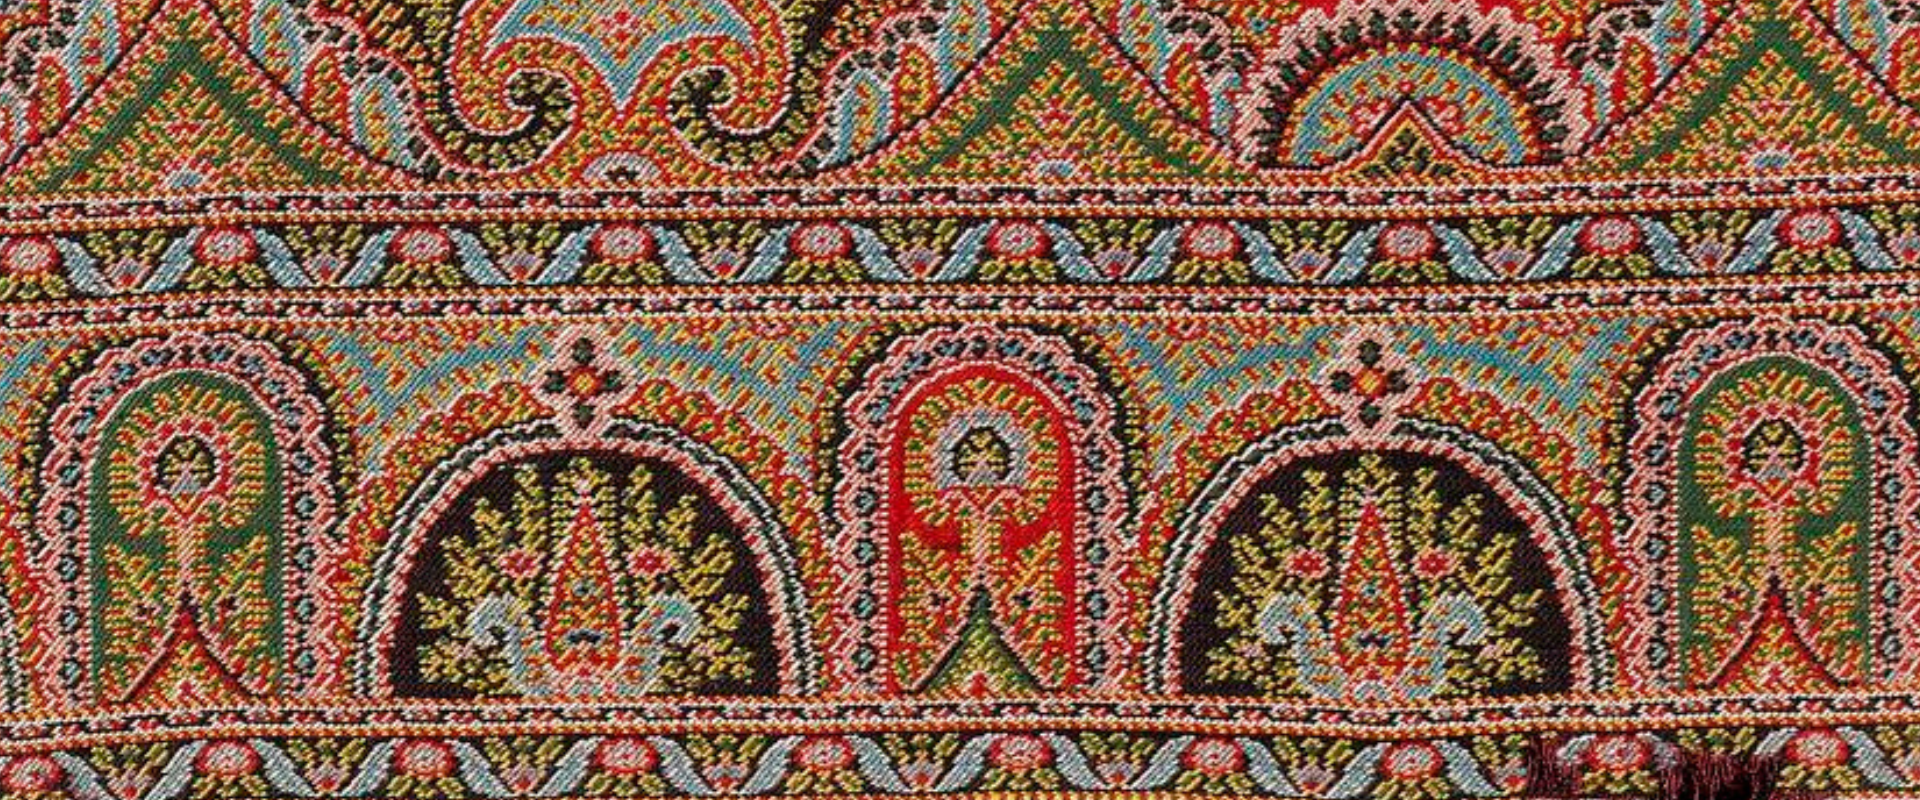 Paisley shawl pattern, short length of a woven border with long cone or buta shapes at the centre, detailed multi-coloured design predominantly in shades of red, blue and green.